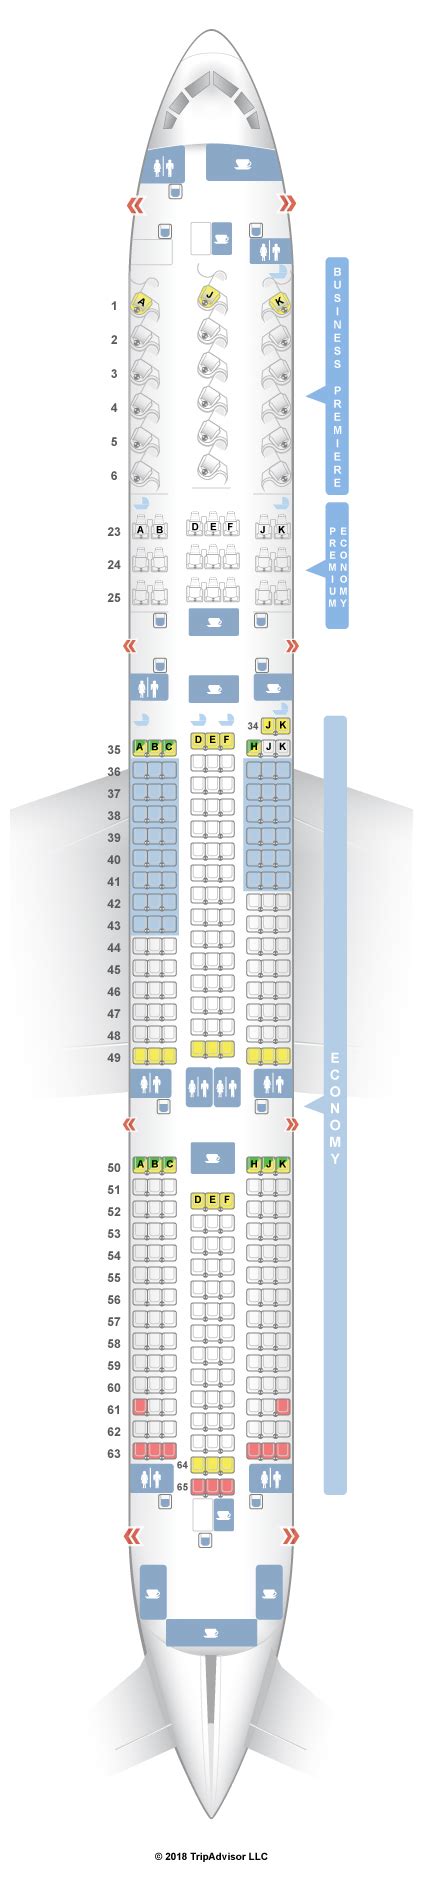 Seat Map And Seating Chart Boeing 787 9 Dreamliner Gulf Air Airbus